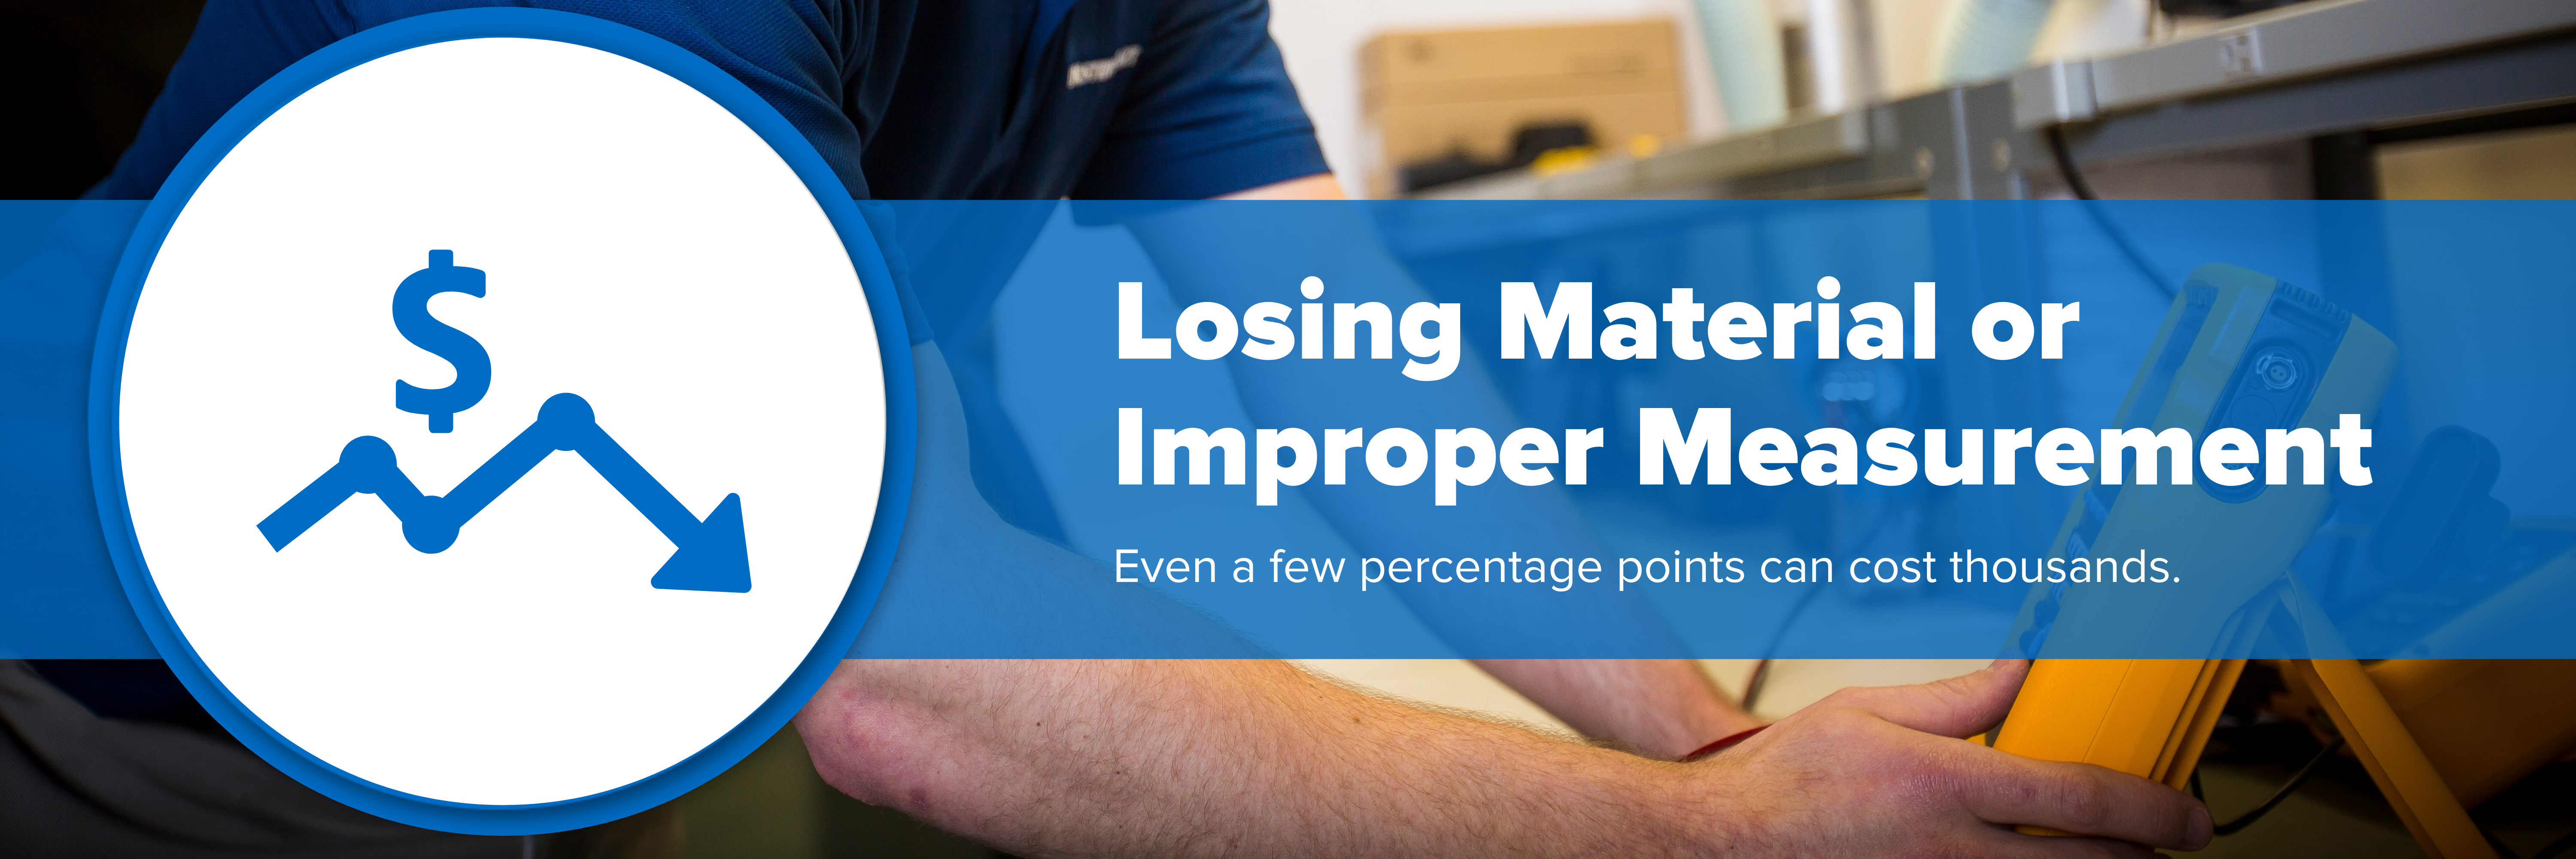 Header image for how losing material and improper volumetric measurements can cost a company lots of money.